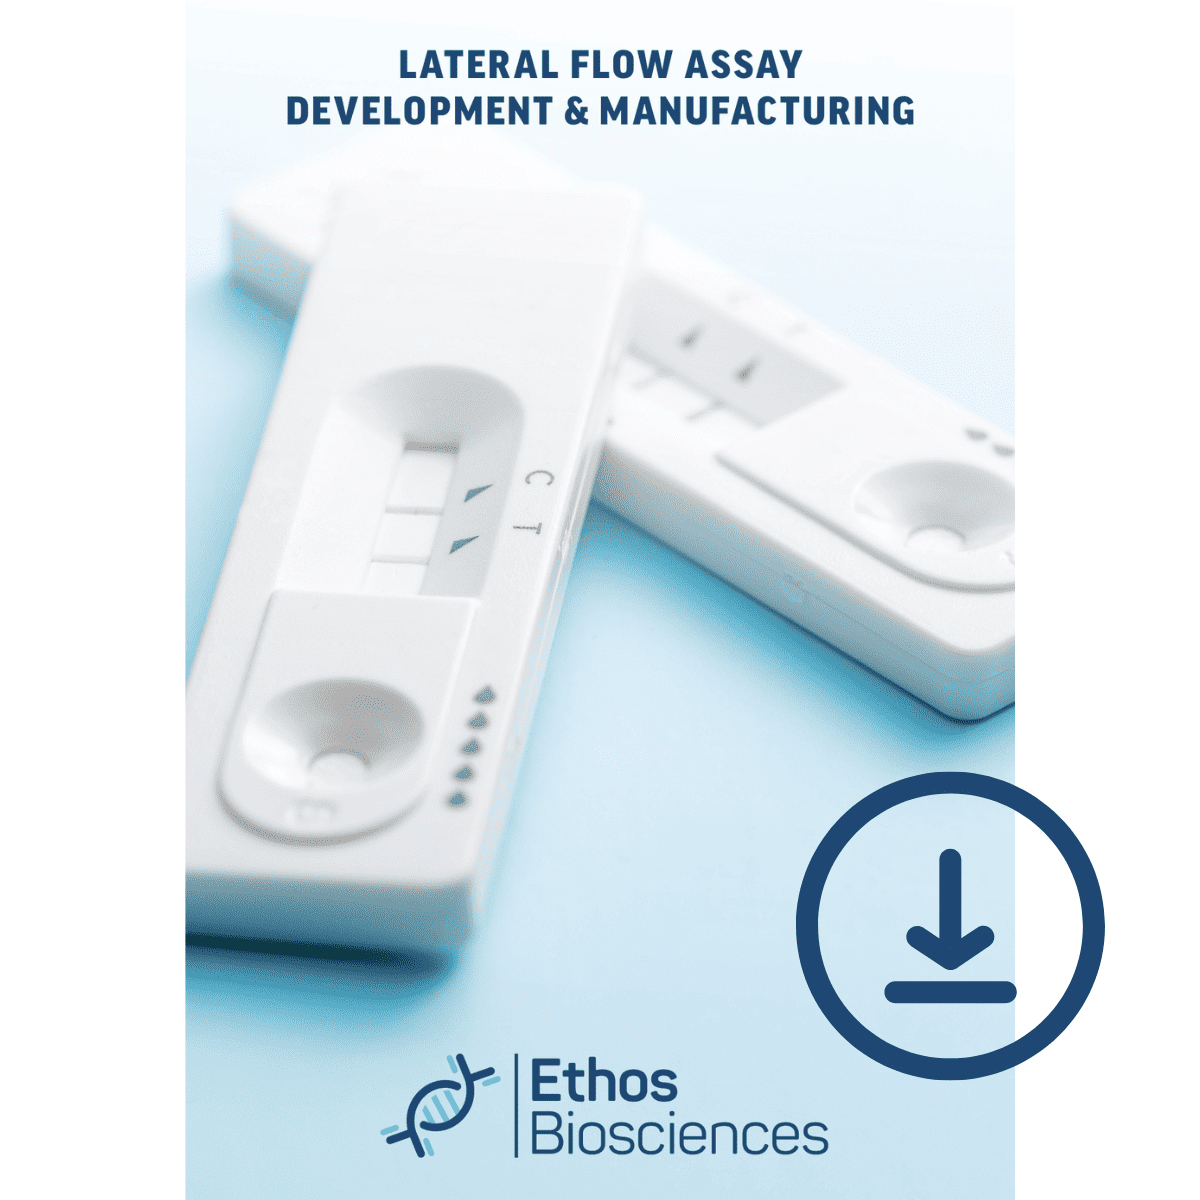 Lateral Flow Assay Development & Manufacturing